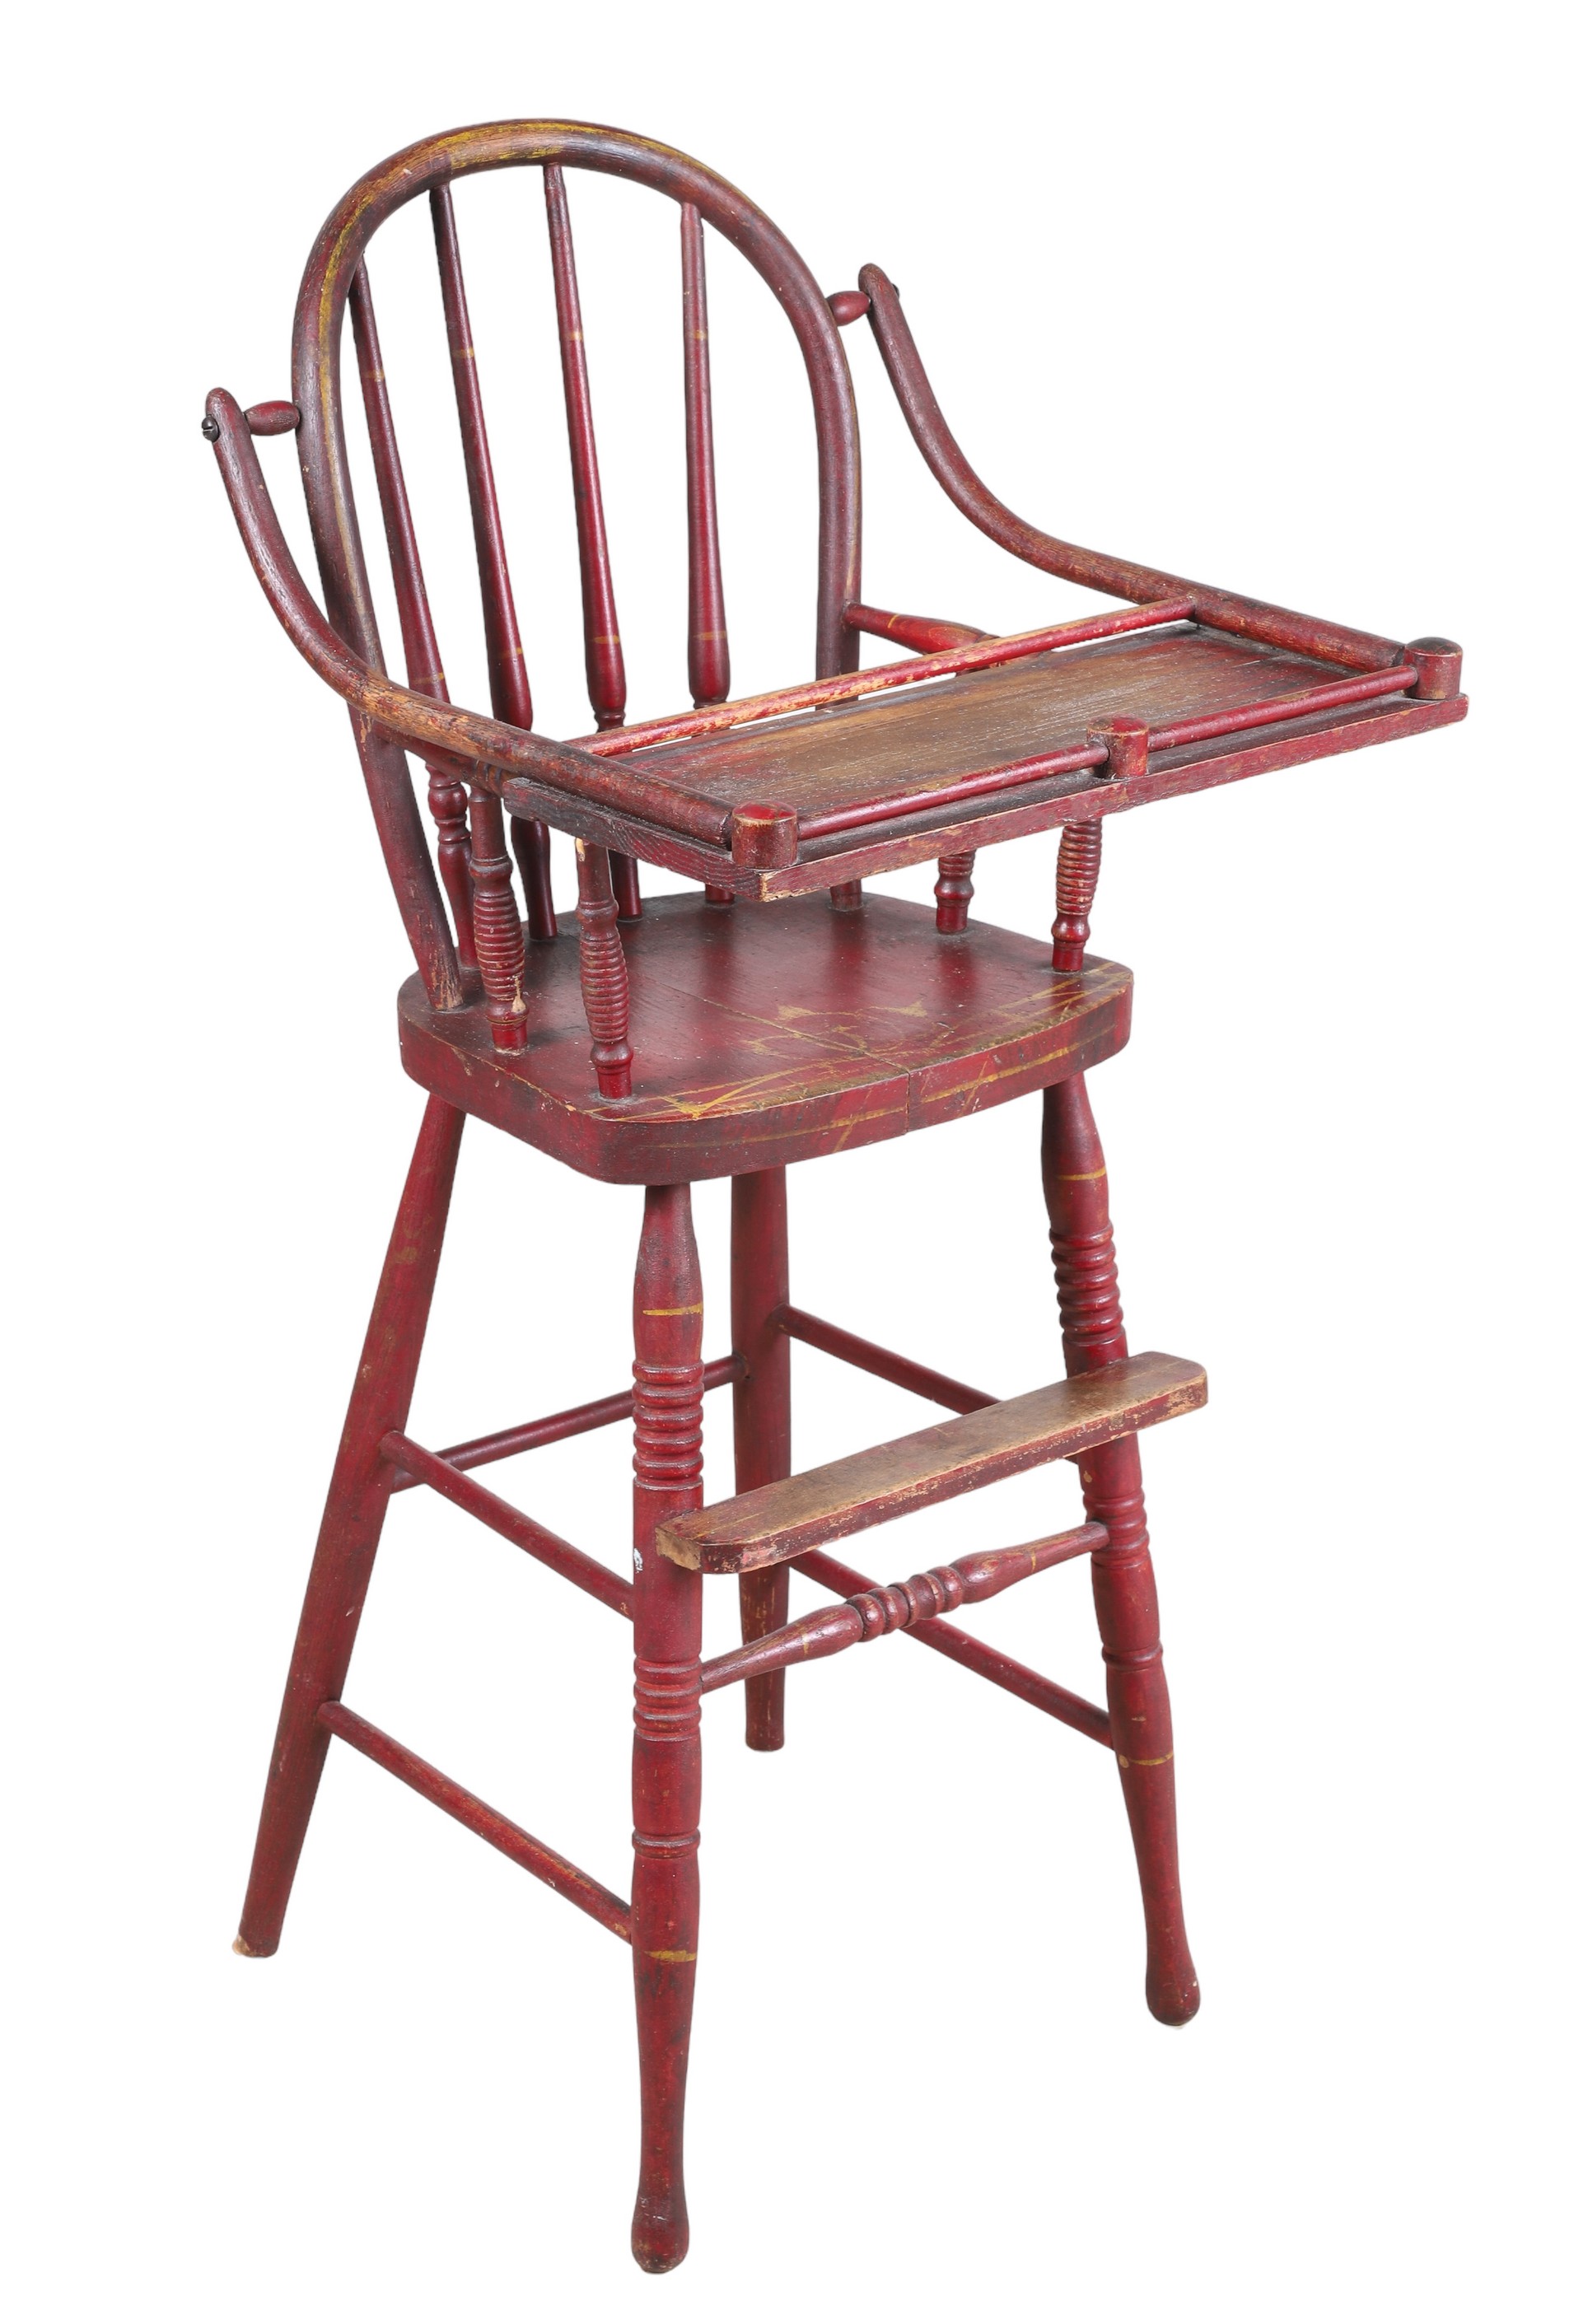 Painted childs high chair red 2e1515